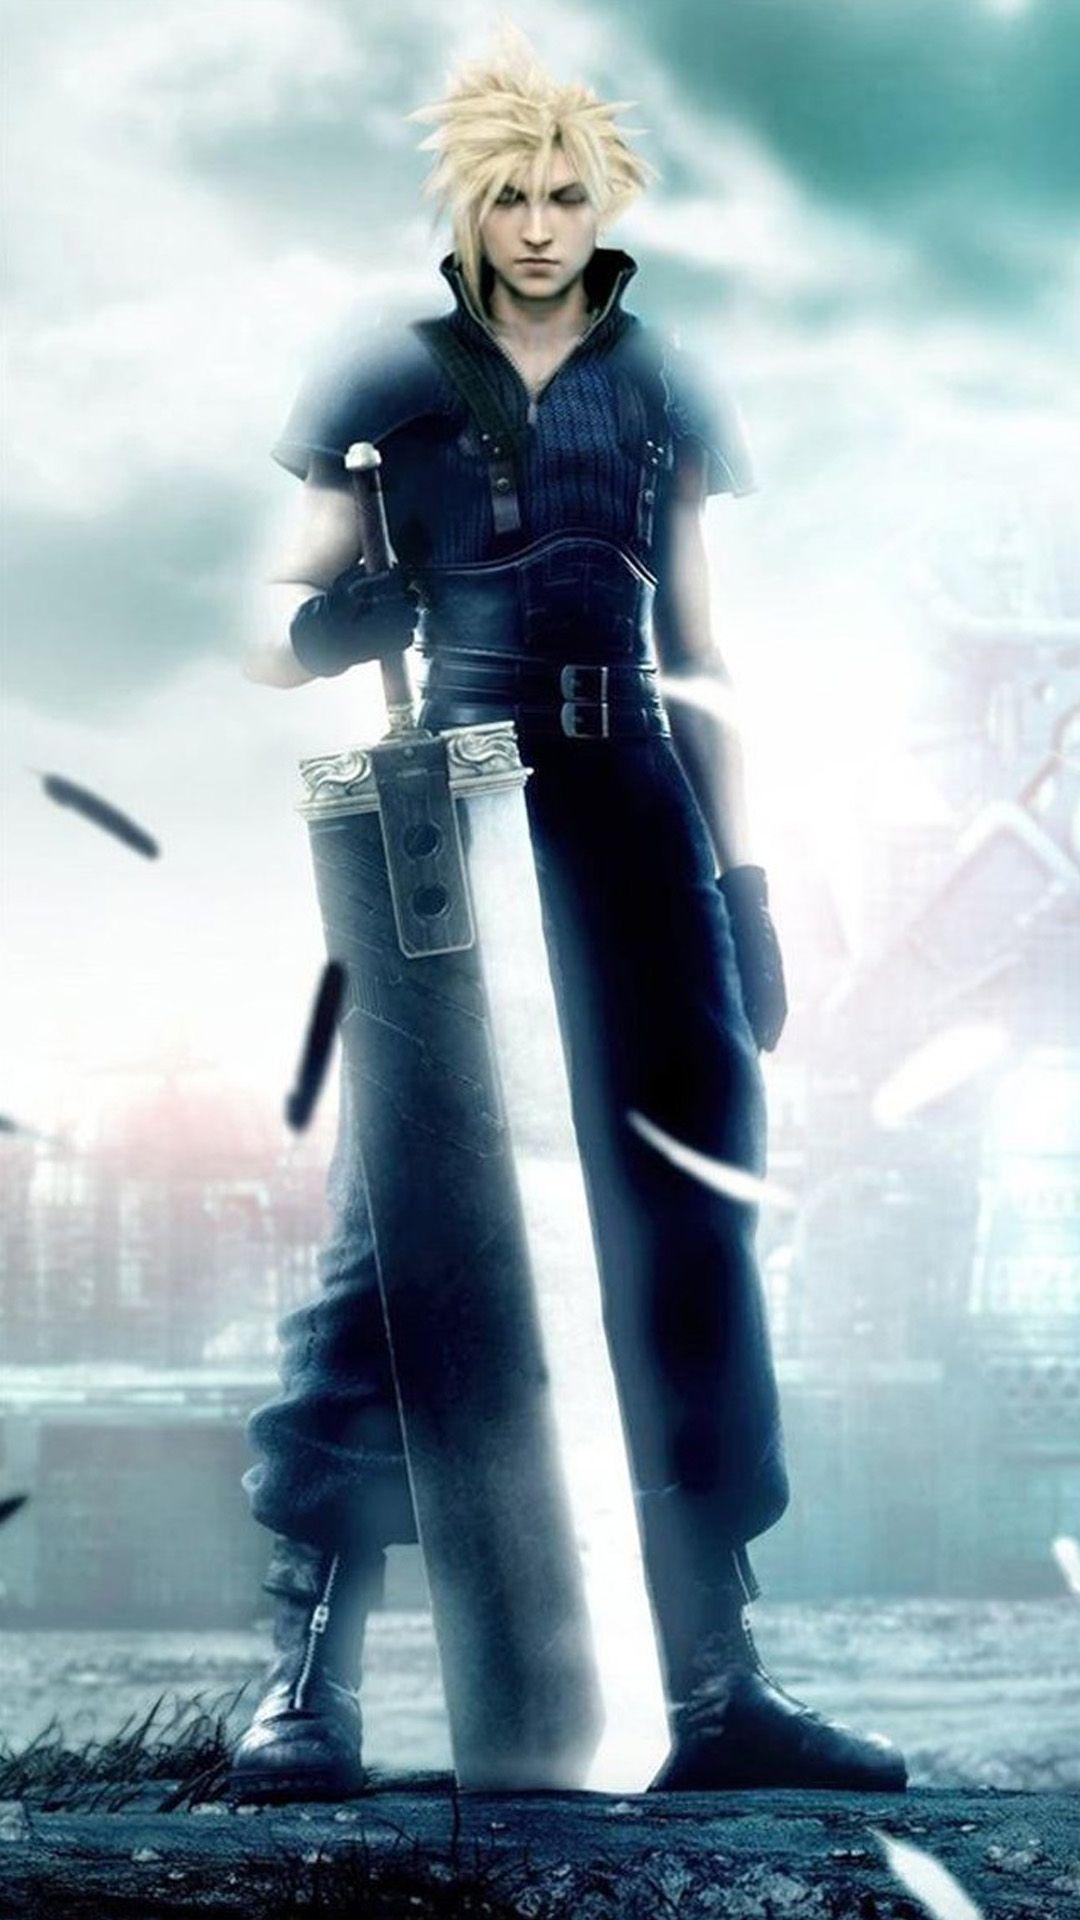 Cloud Strife Wallpapers Top Free Cloud Strife Backgrounds Wallpaperaccess